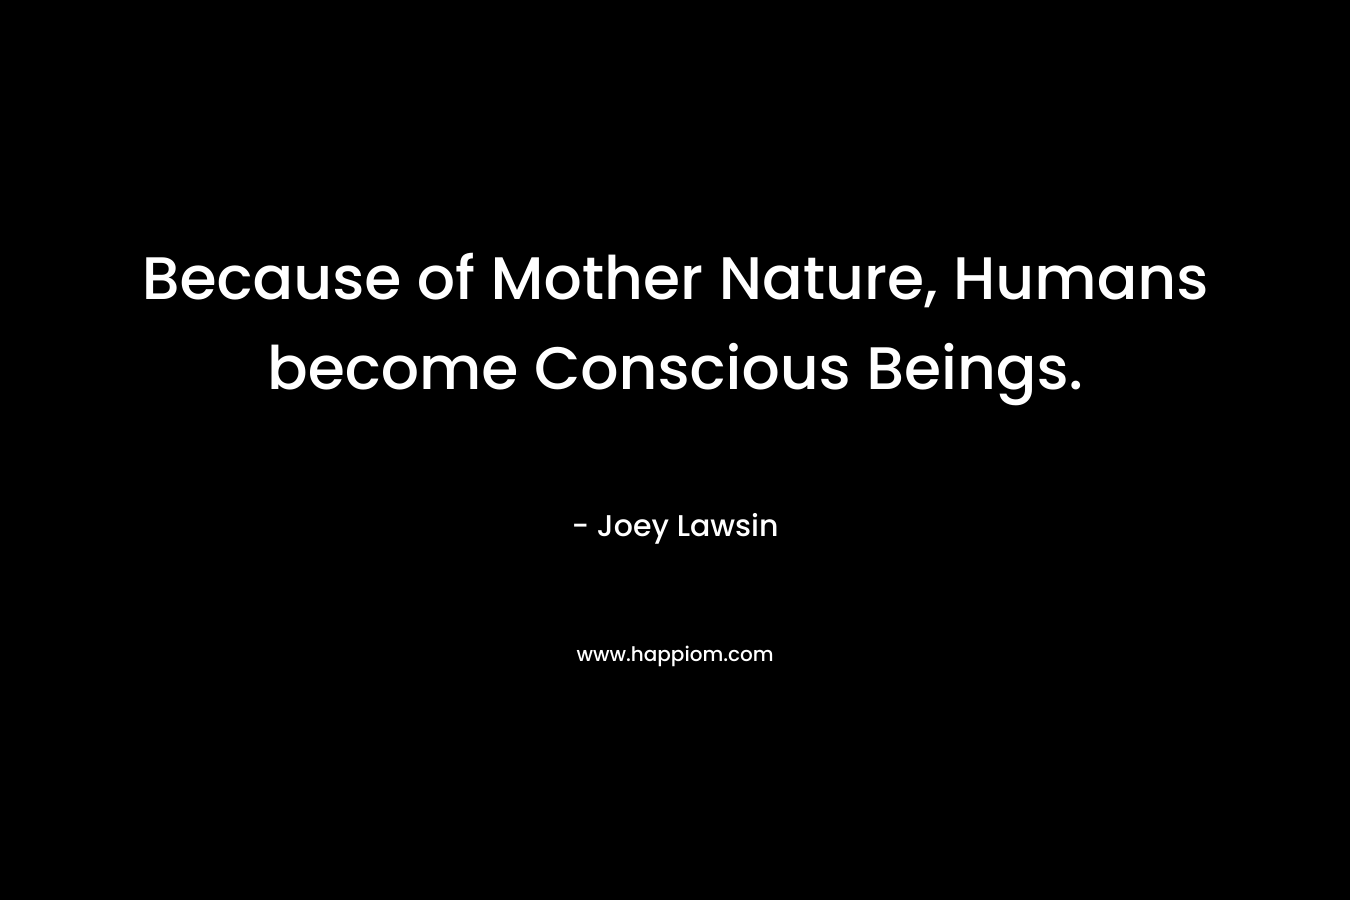 Because of Mother Nature, Humans become Conscious Beings. – Joey Lawsin